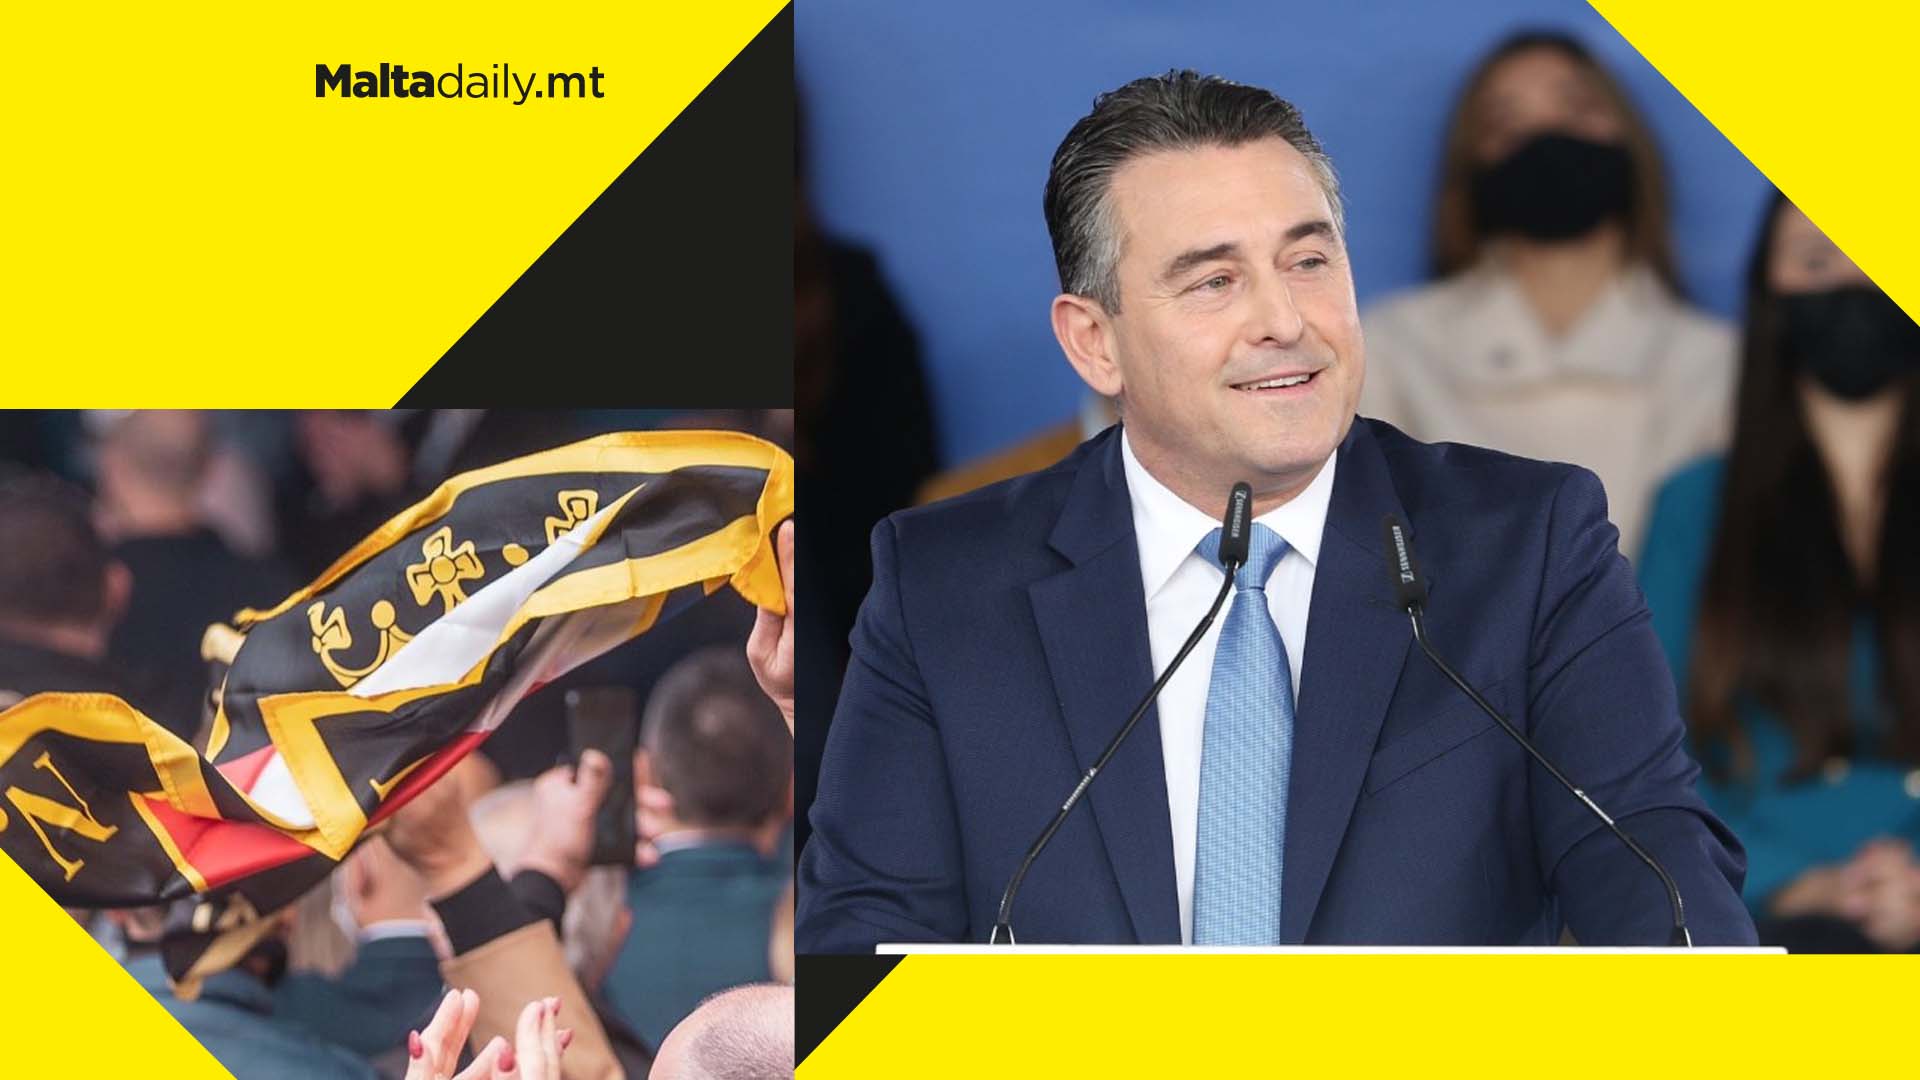 €1 billion investment in 10 new economic sectors promised by PN